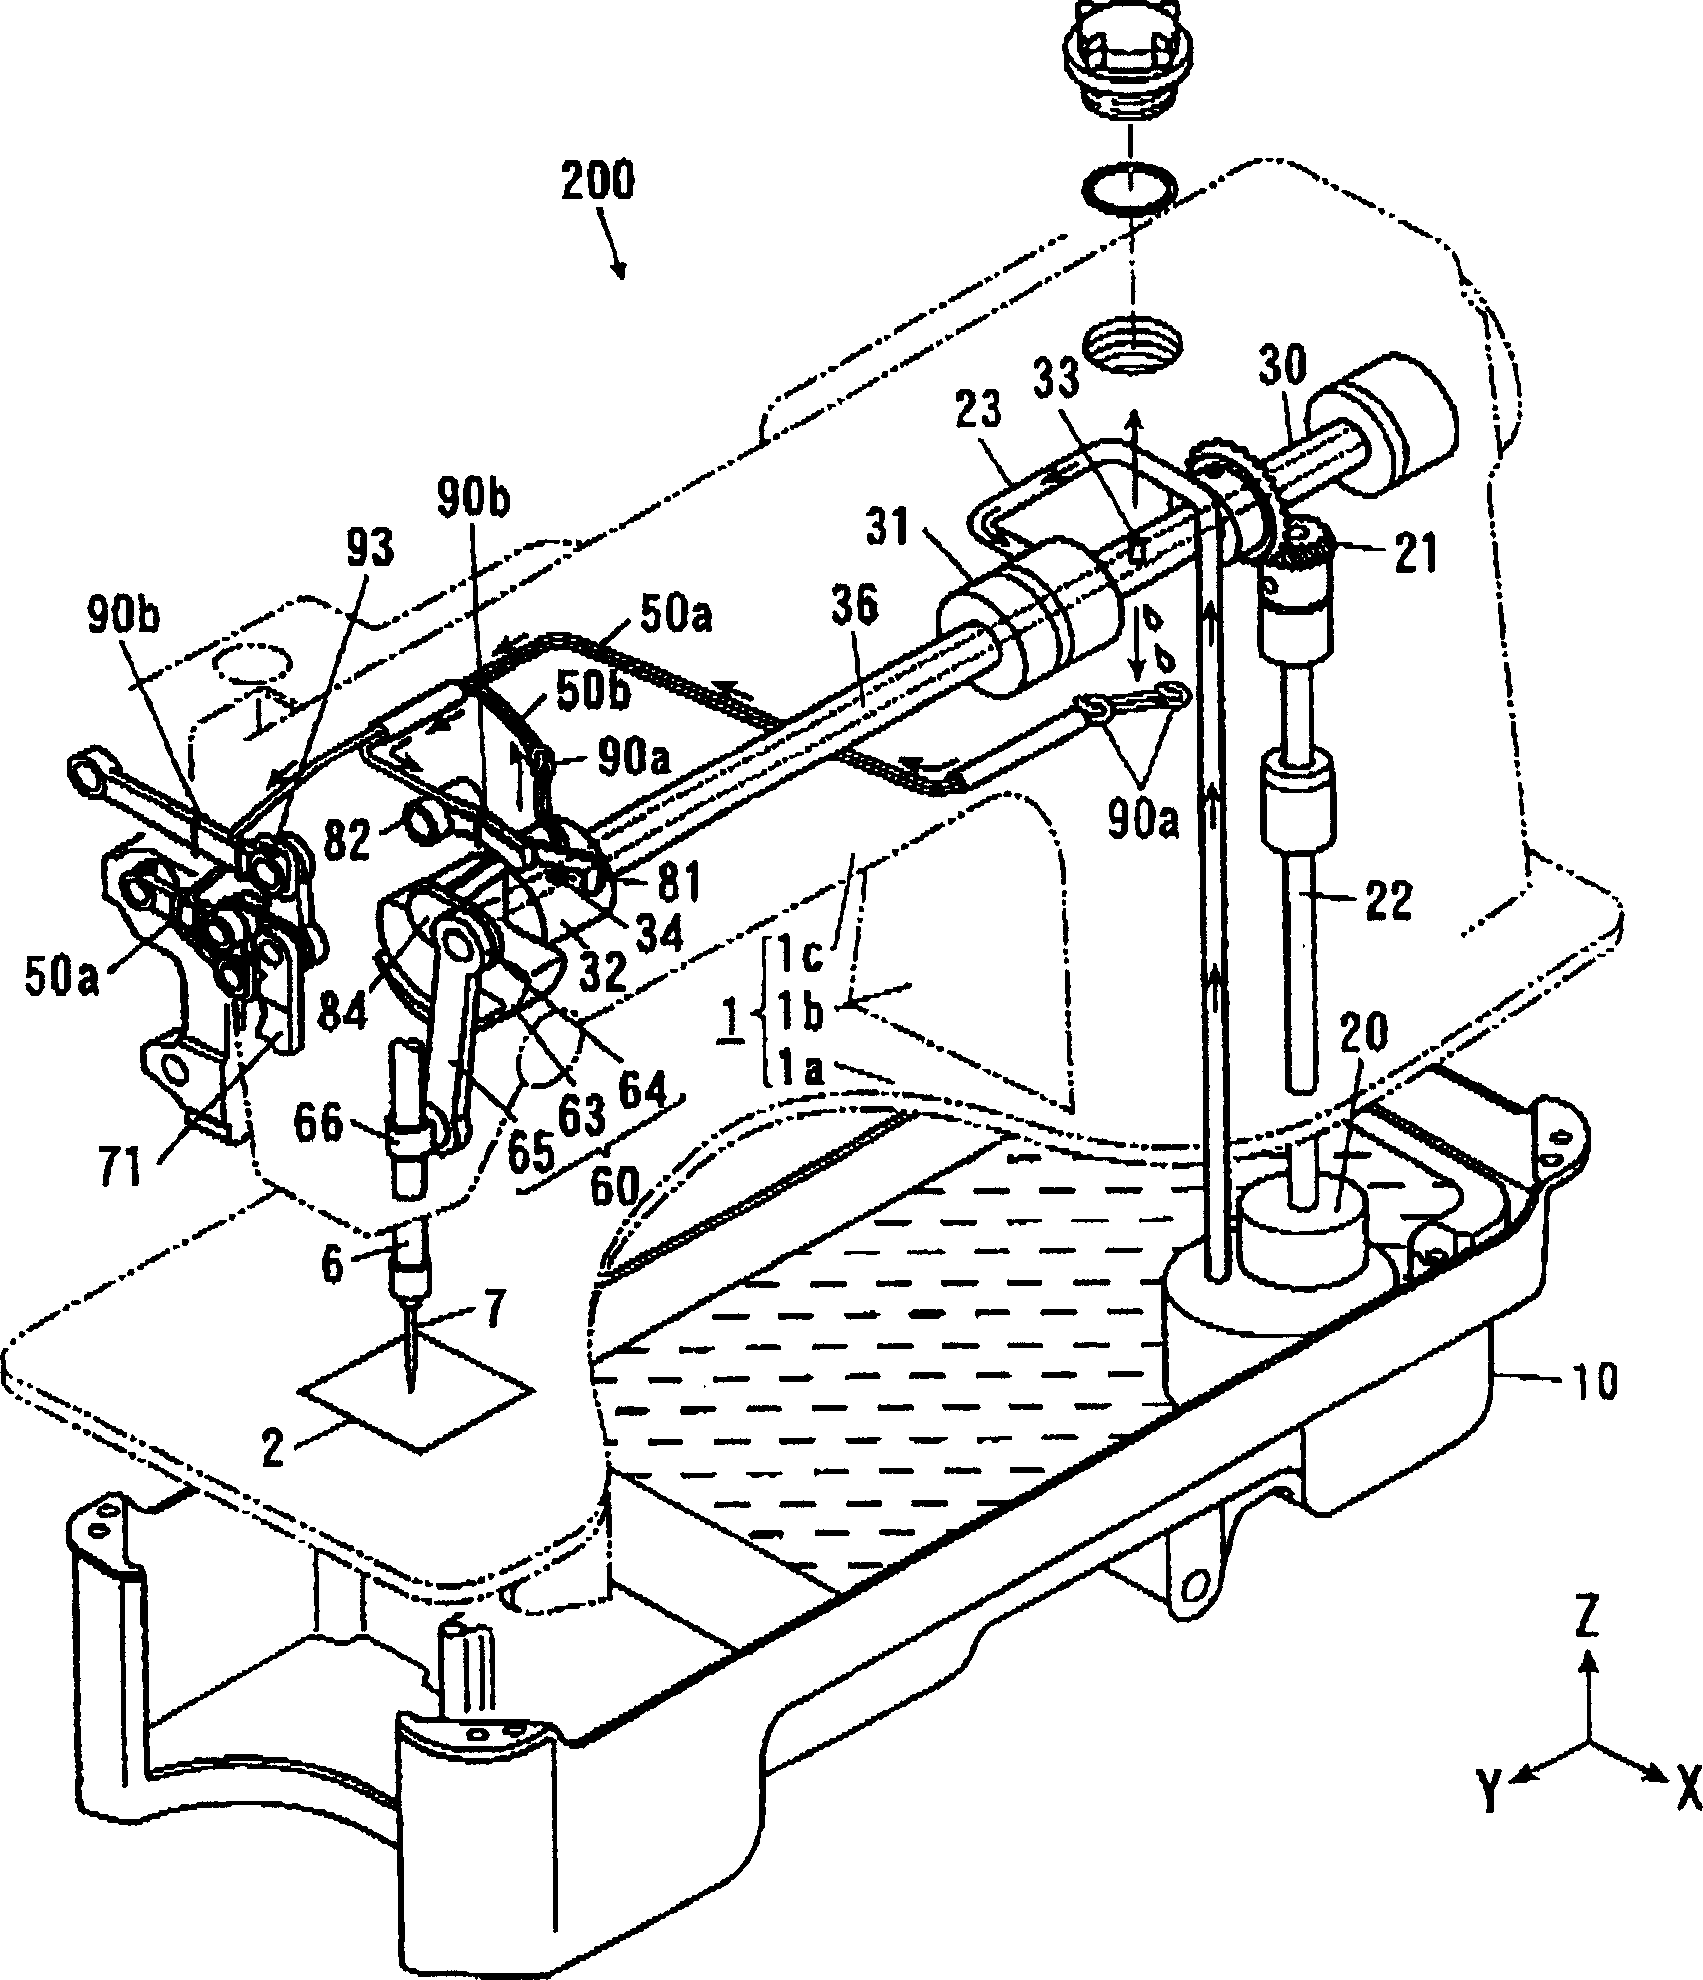 Oil feeding device of sewing machine